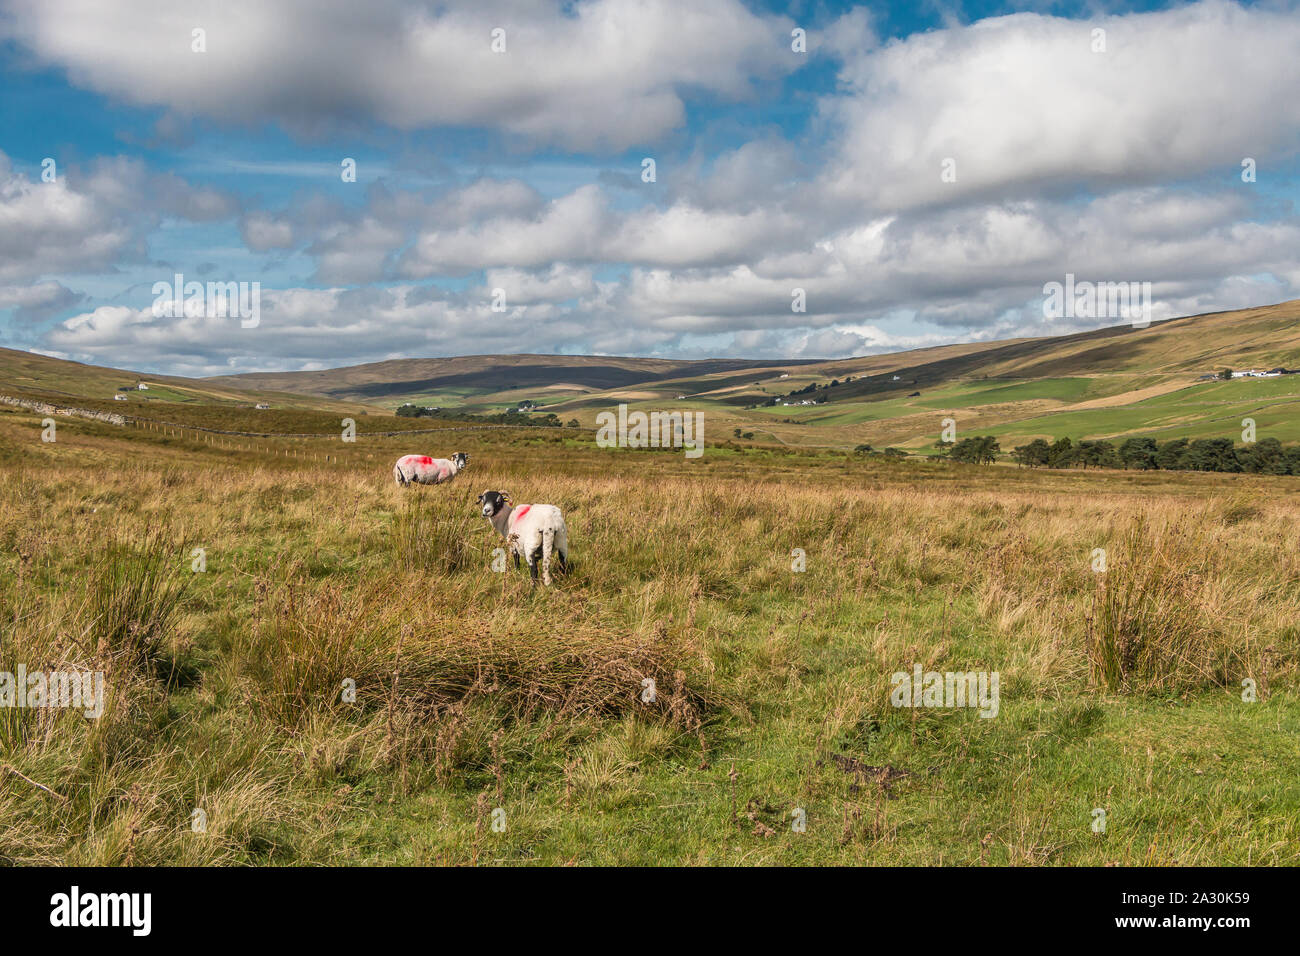 Into Harwood from the Cow Green Road, Upper Teesdale, UK Stock Photo